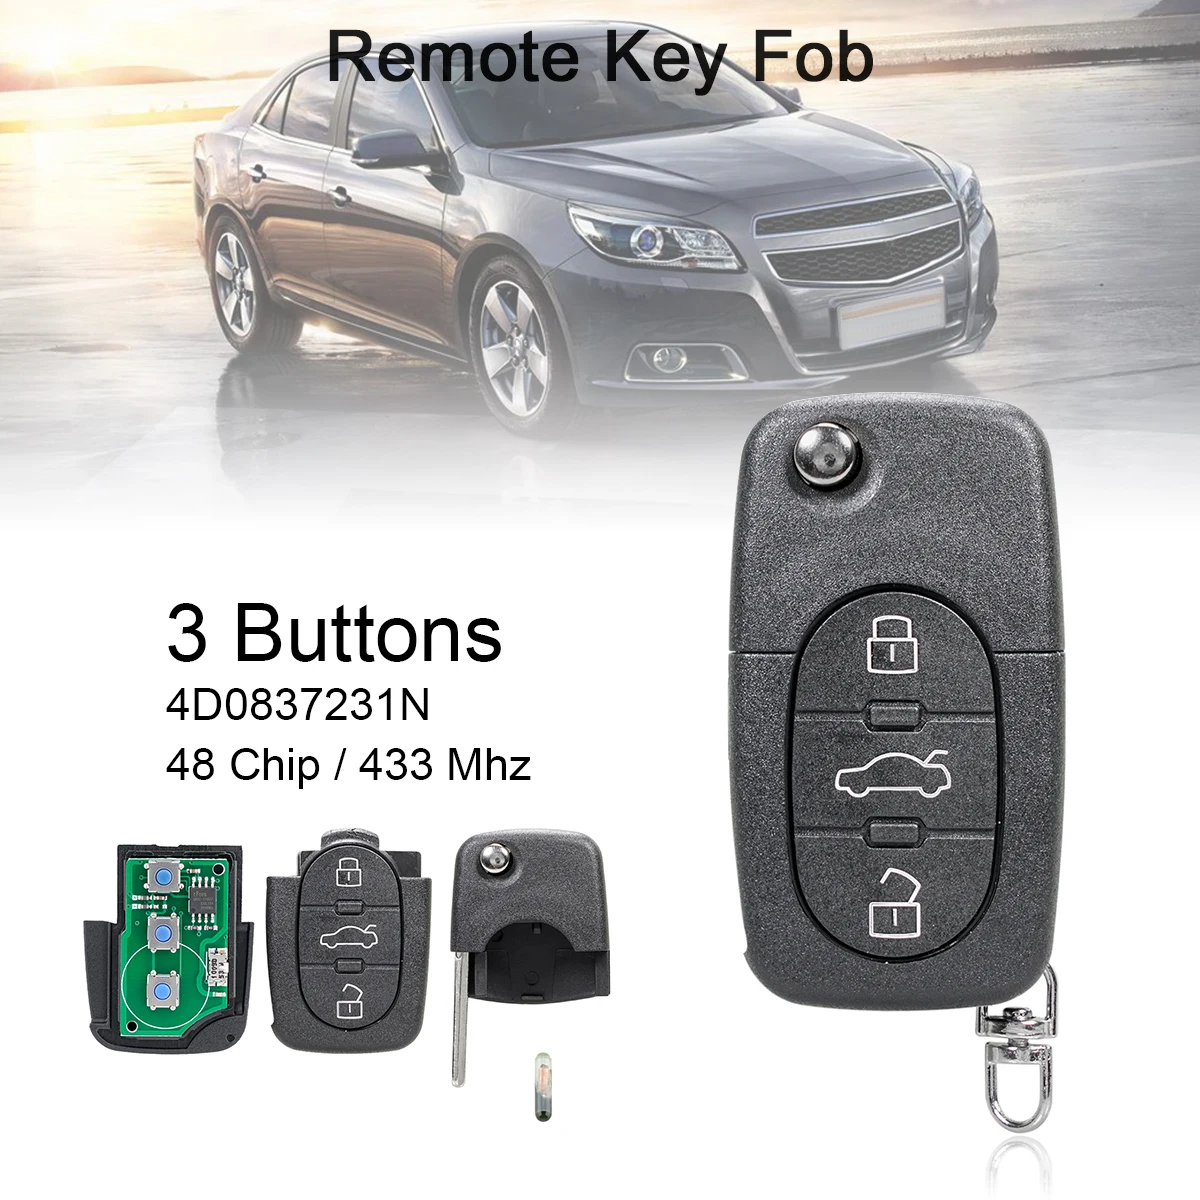 433MHh 3 Buttons Car Remote Key with ID48 Chip  4D0837231N for Audi- A2 A3 A4 A6 A8 TT 2002-2004 Keyless Entry Systems yiqixin 3 button remote key 433mhz keyless entry fob id48 transponder chip for audi a2 a3 a4 a6 a8 tt old models 4d0 837 231 k